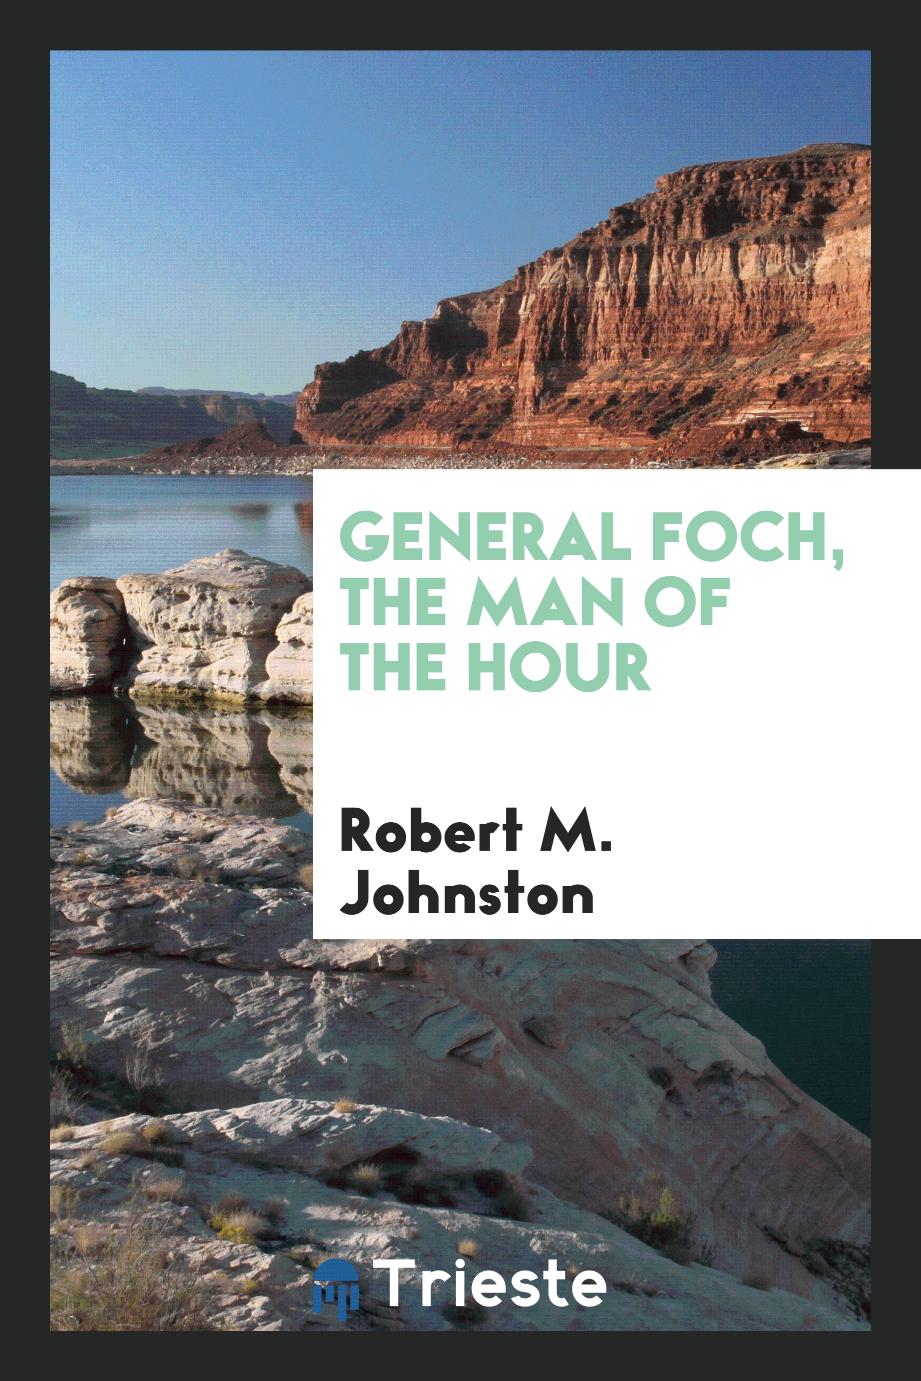 General Foch, the Man of the Hour